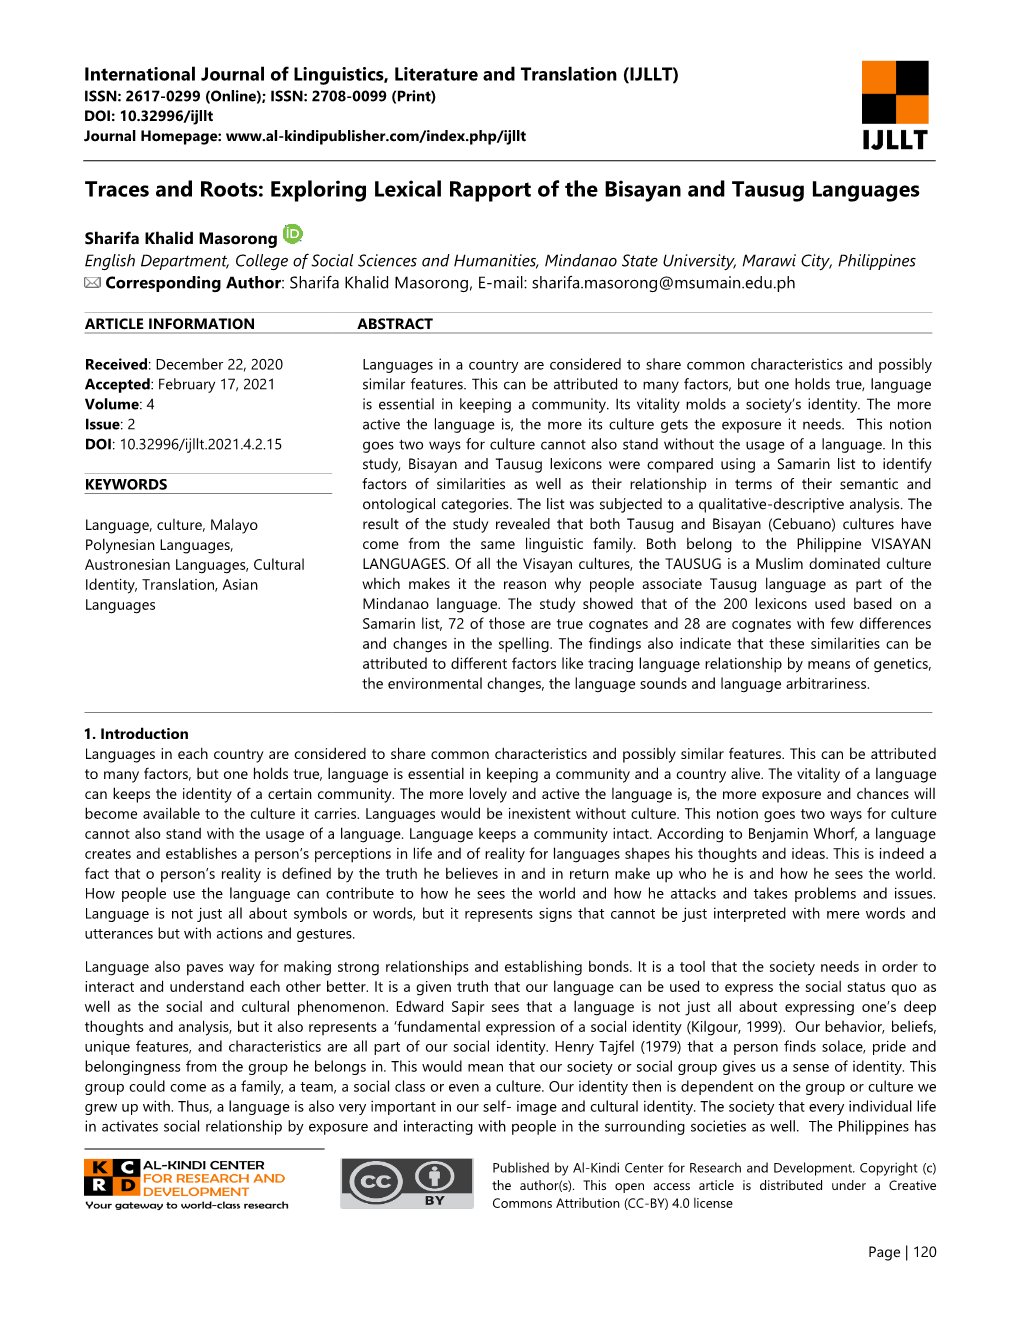 Exploring Lexical Rapport of the Bisayan and Tausug Languages